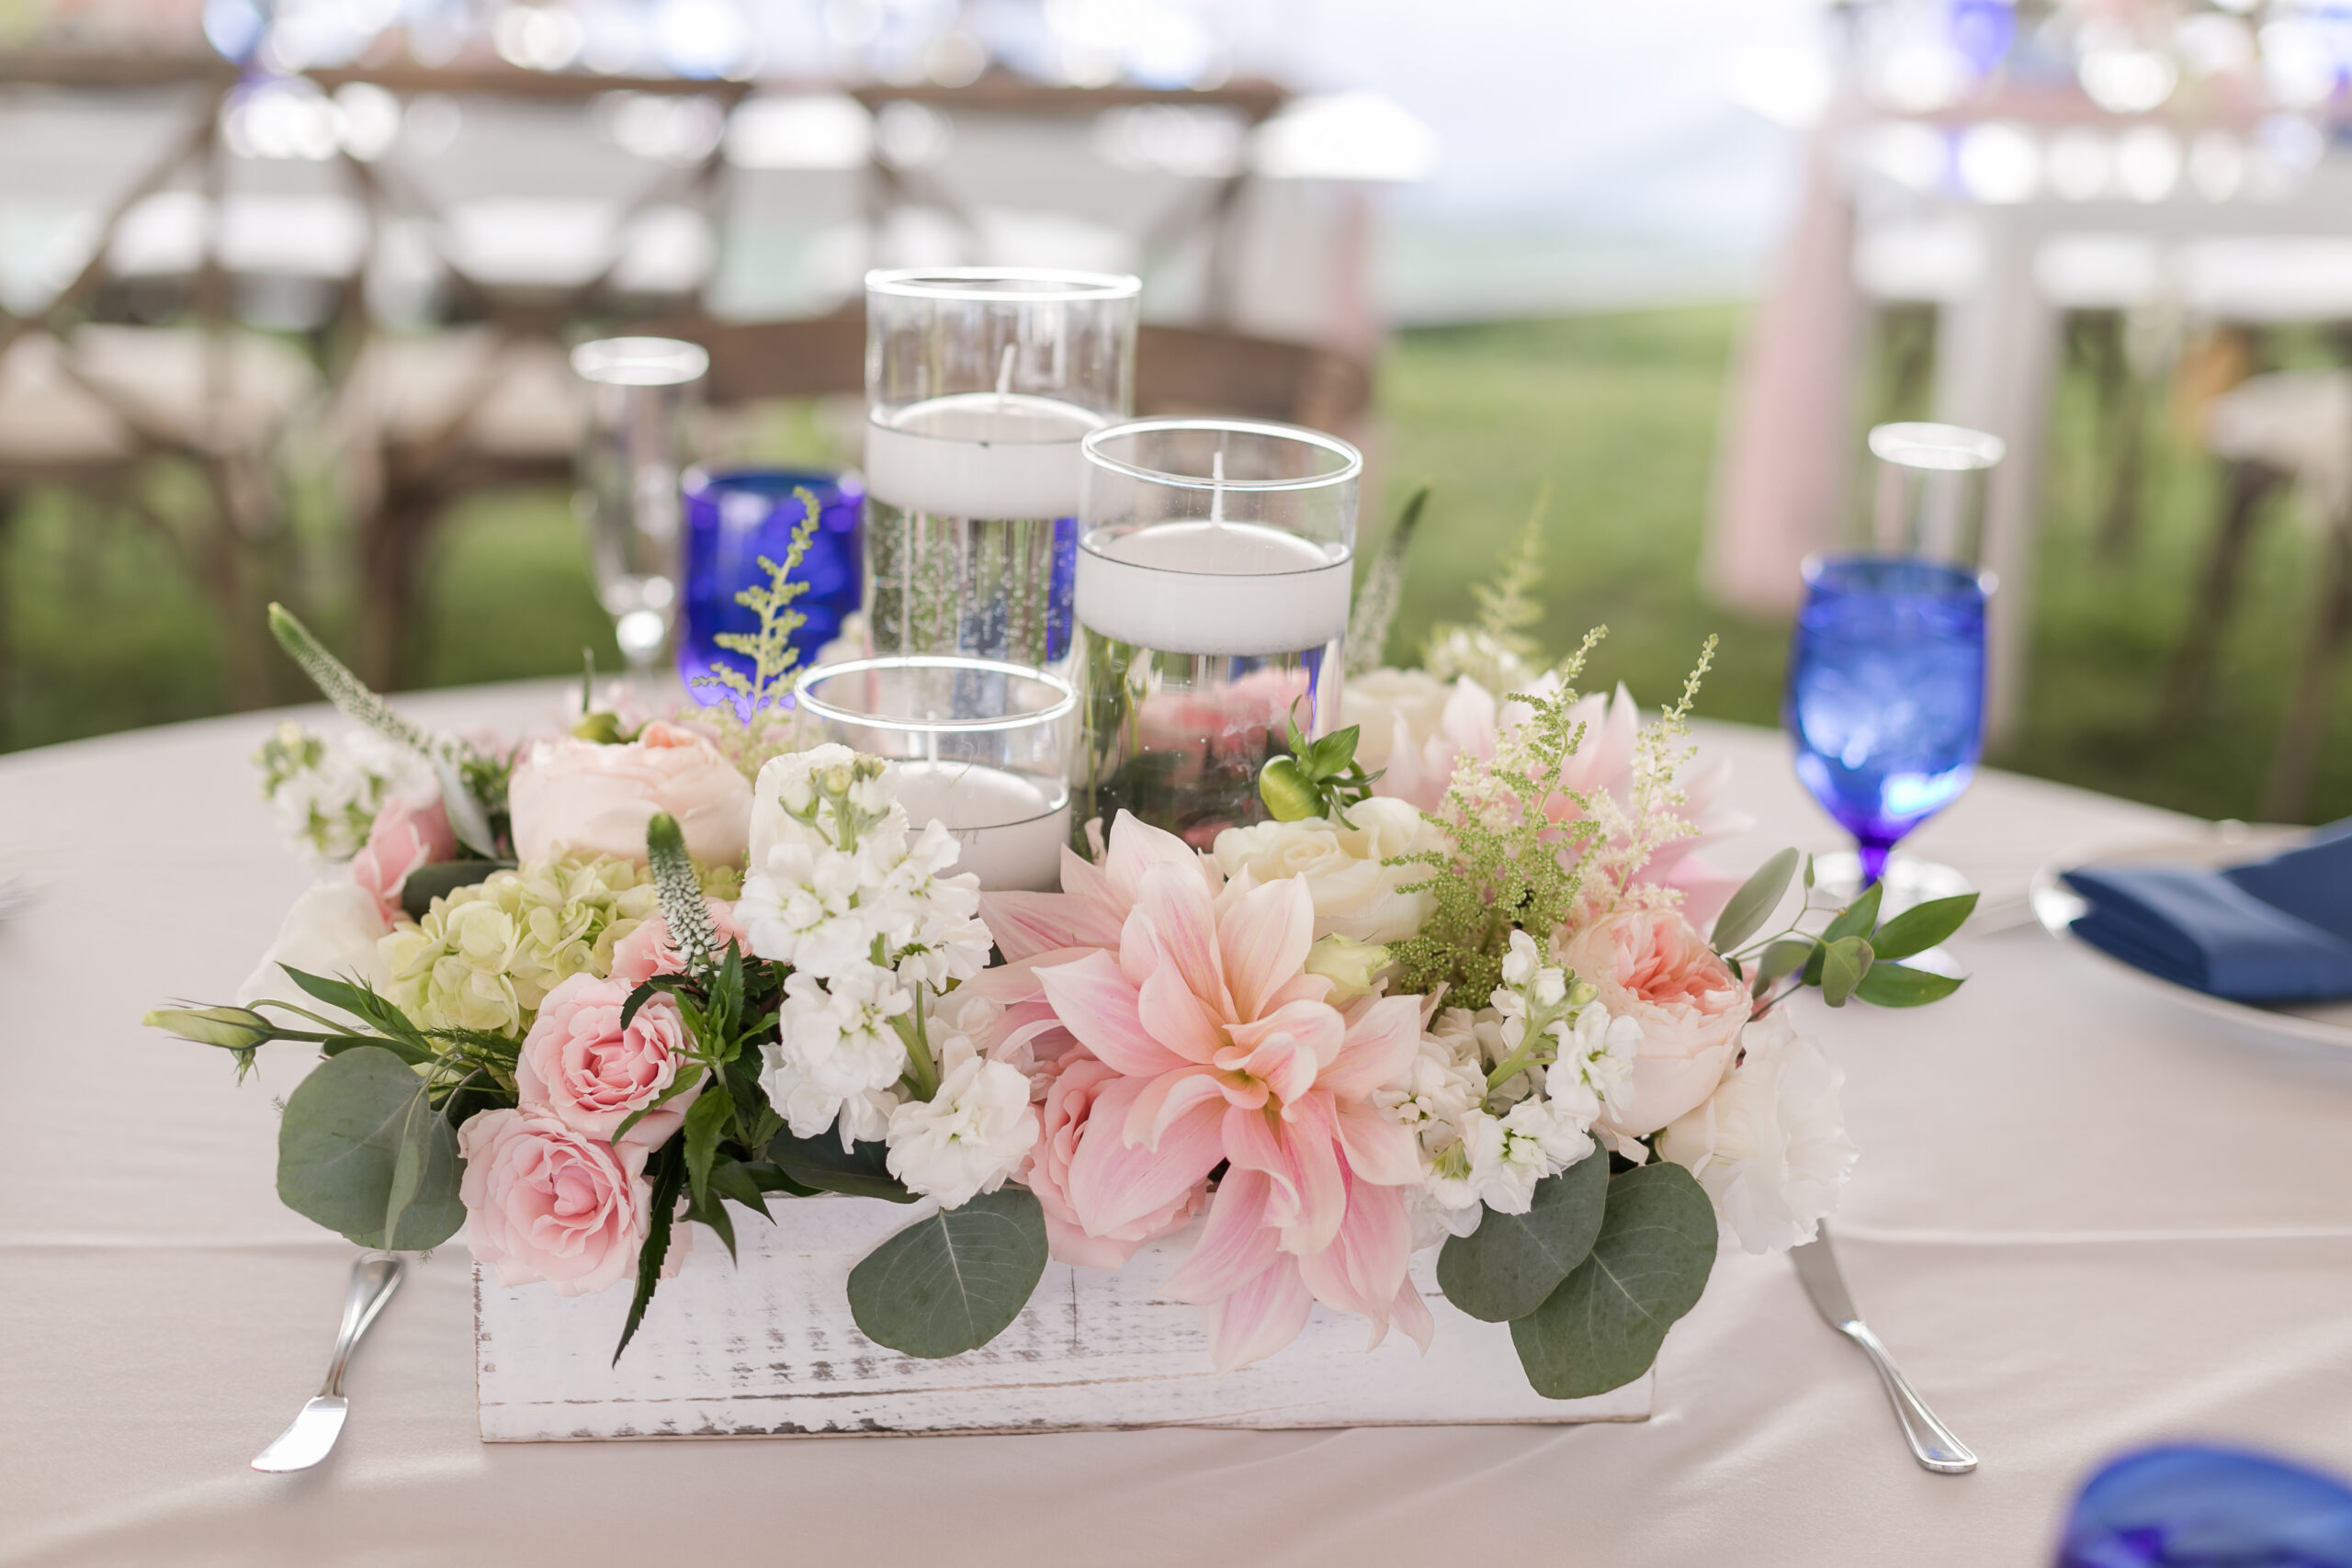 wedding reception table with rustic white wooden box filled with pink and white flowers